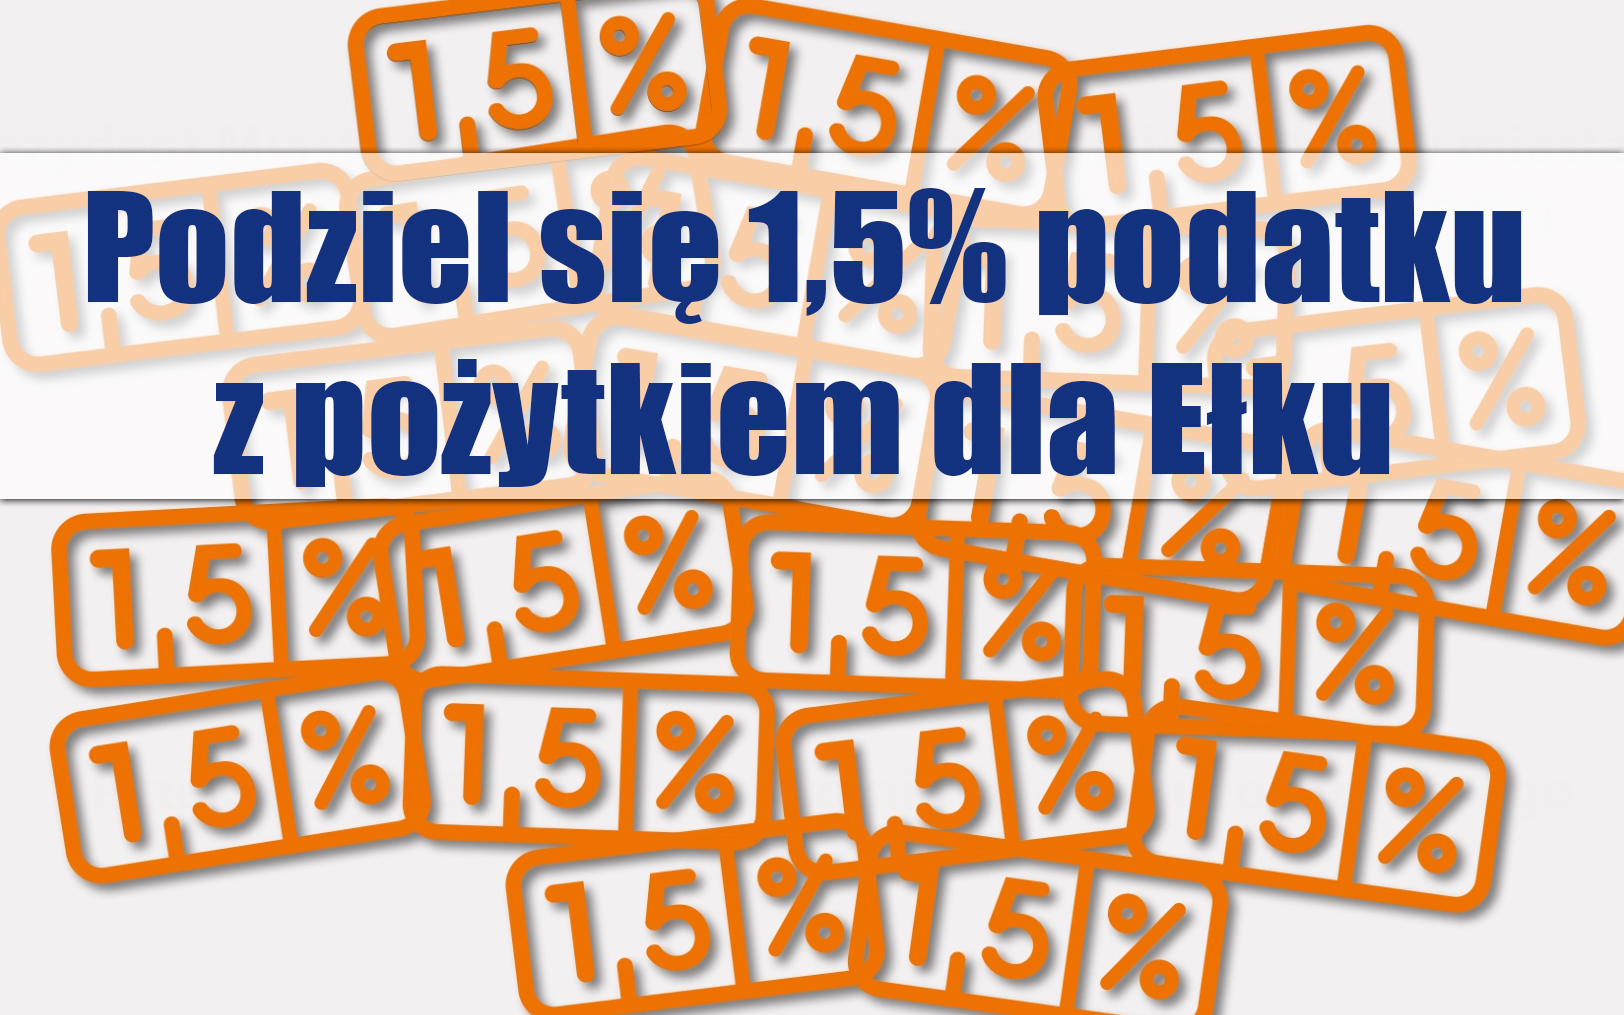 1.5% tax for the benefit of Ełk